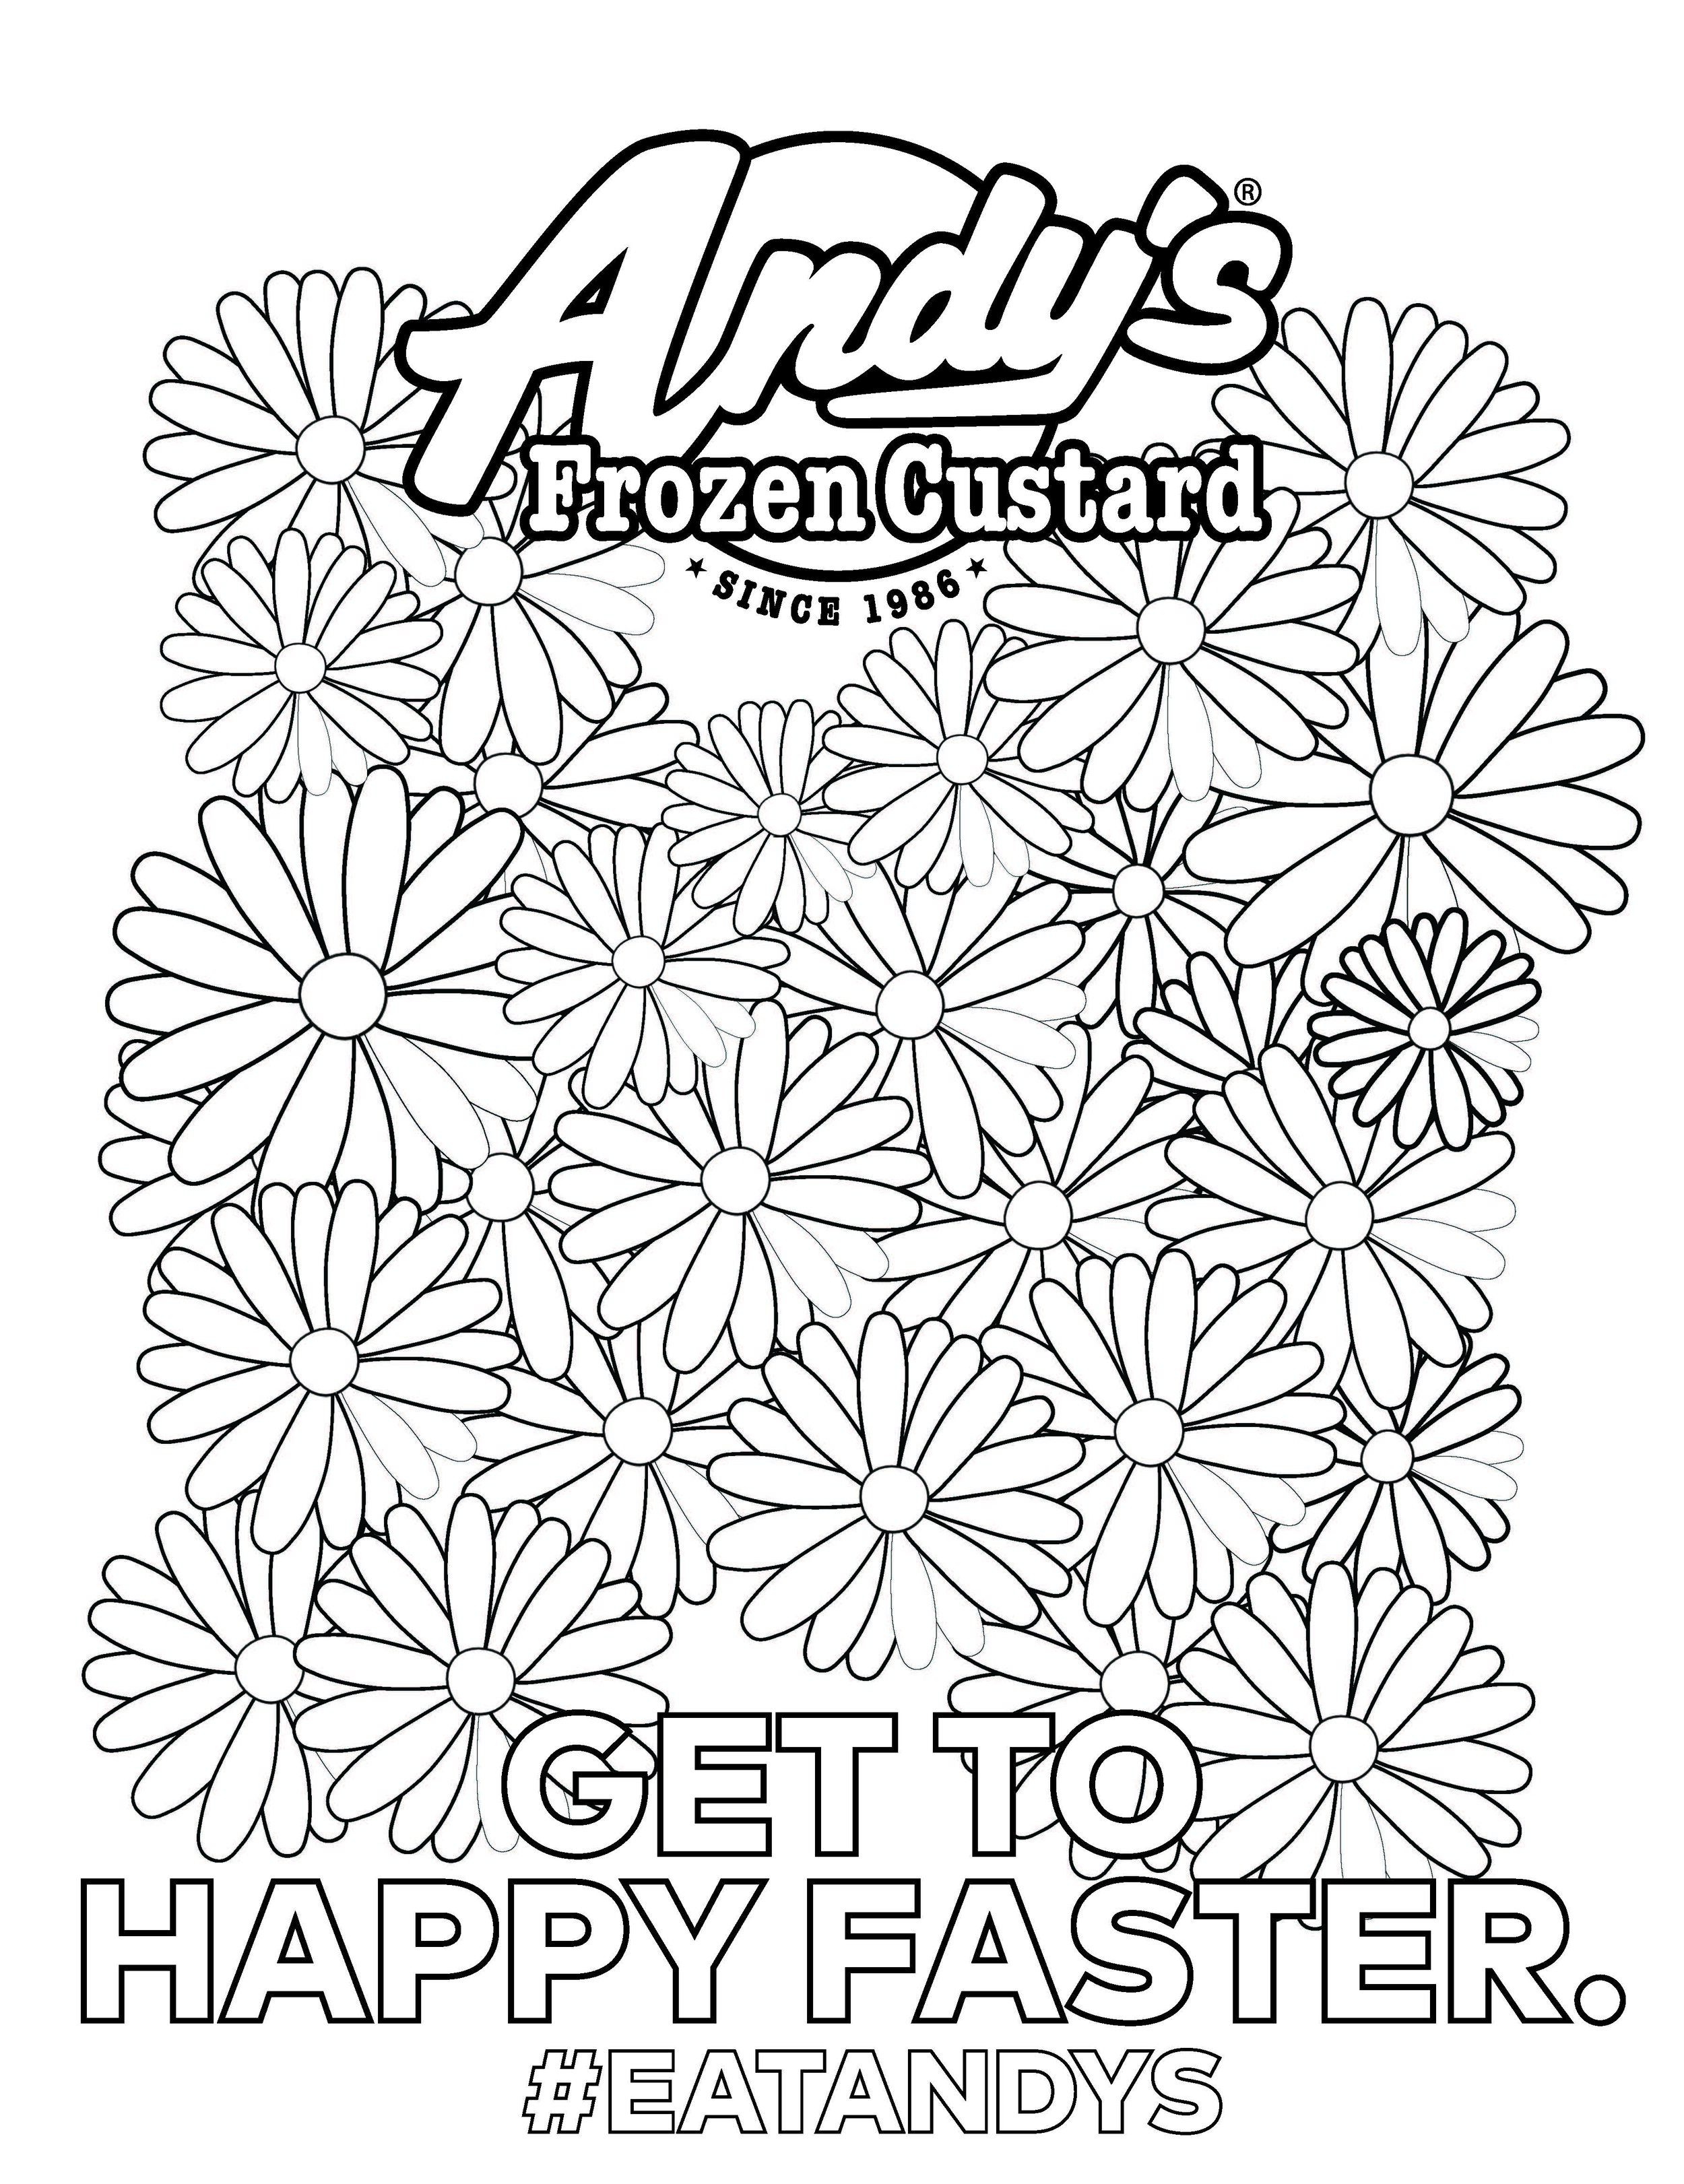 Coloring_Sheets-Flowers_get_to_happy.jpg